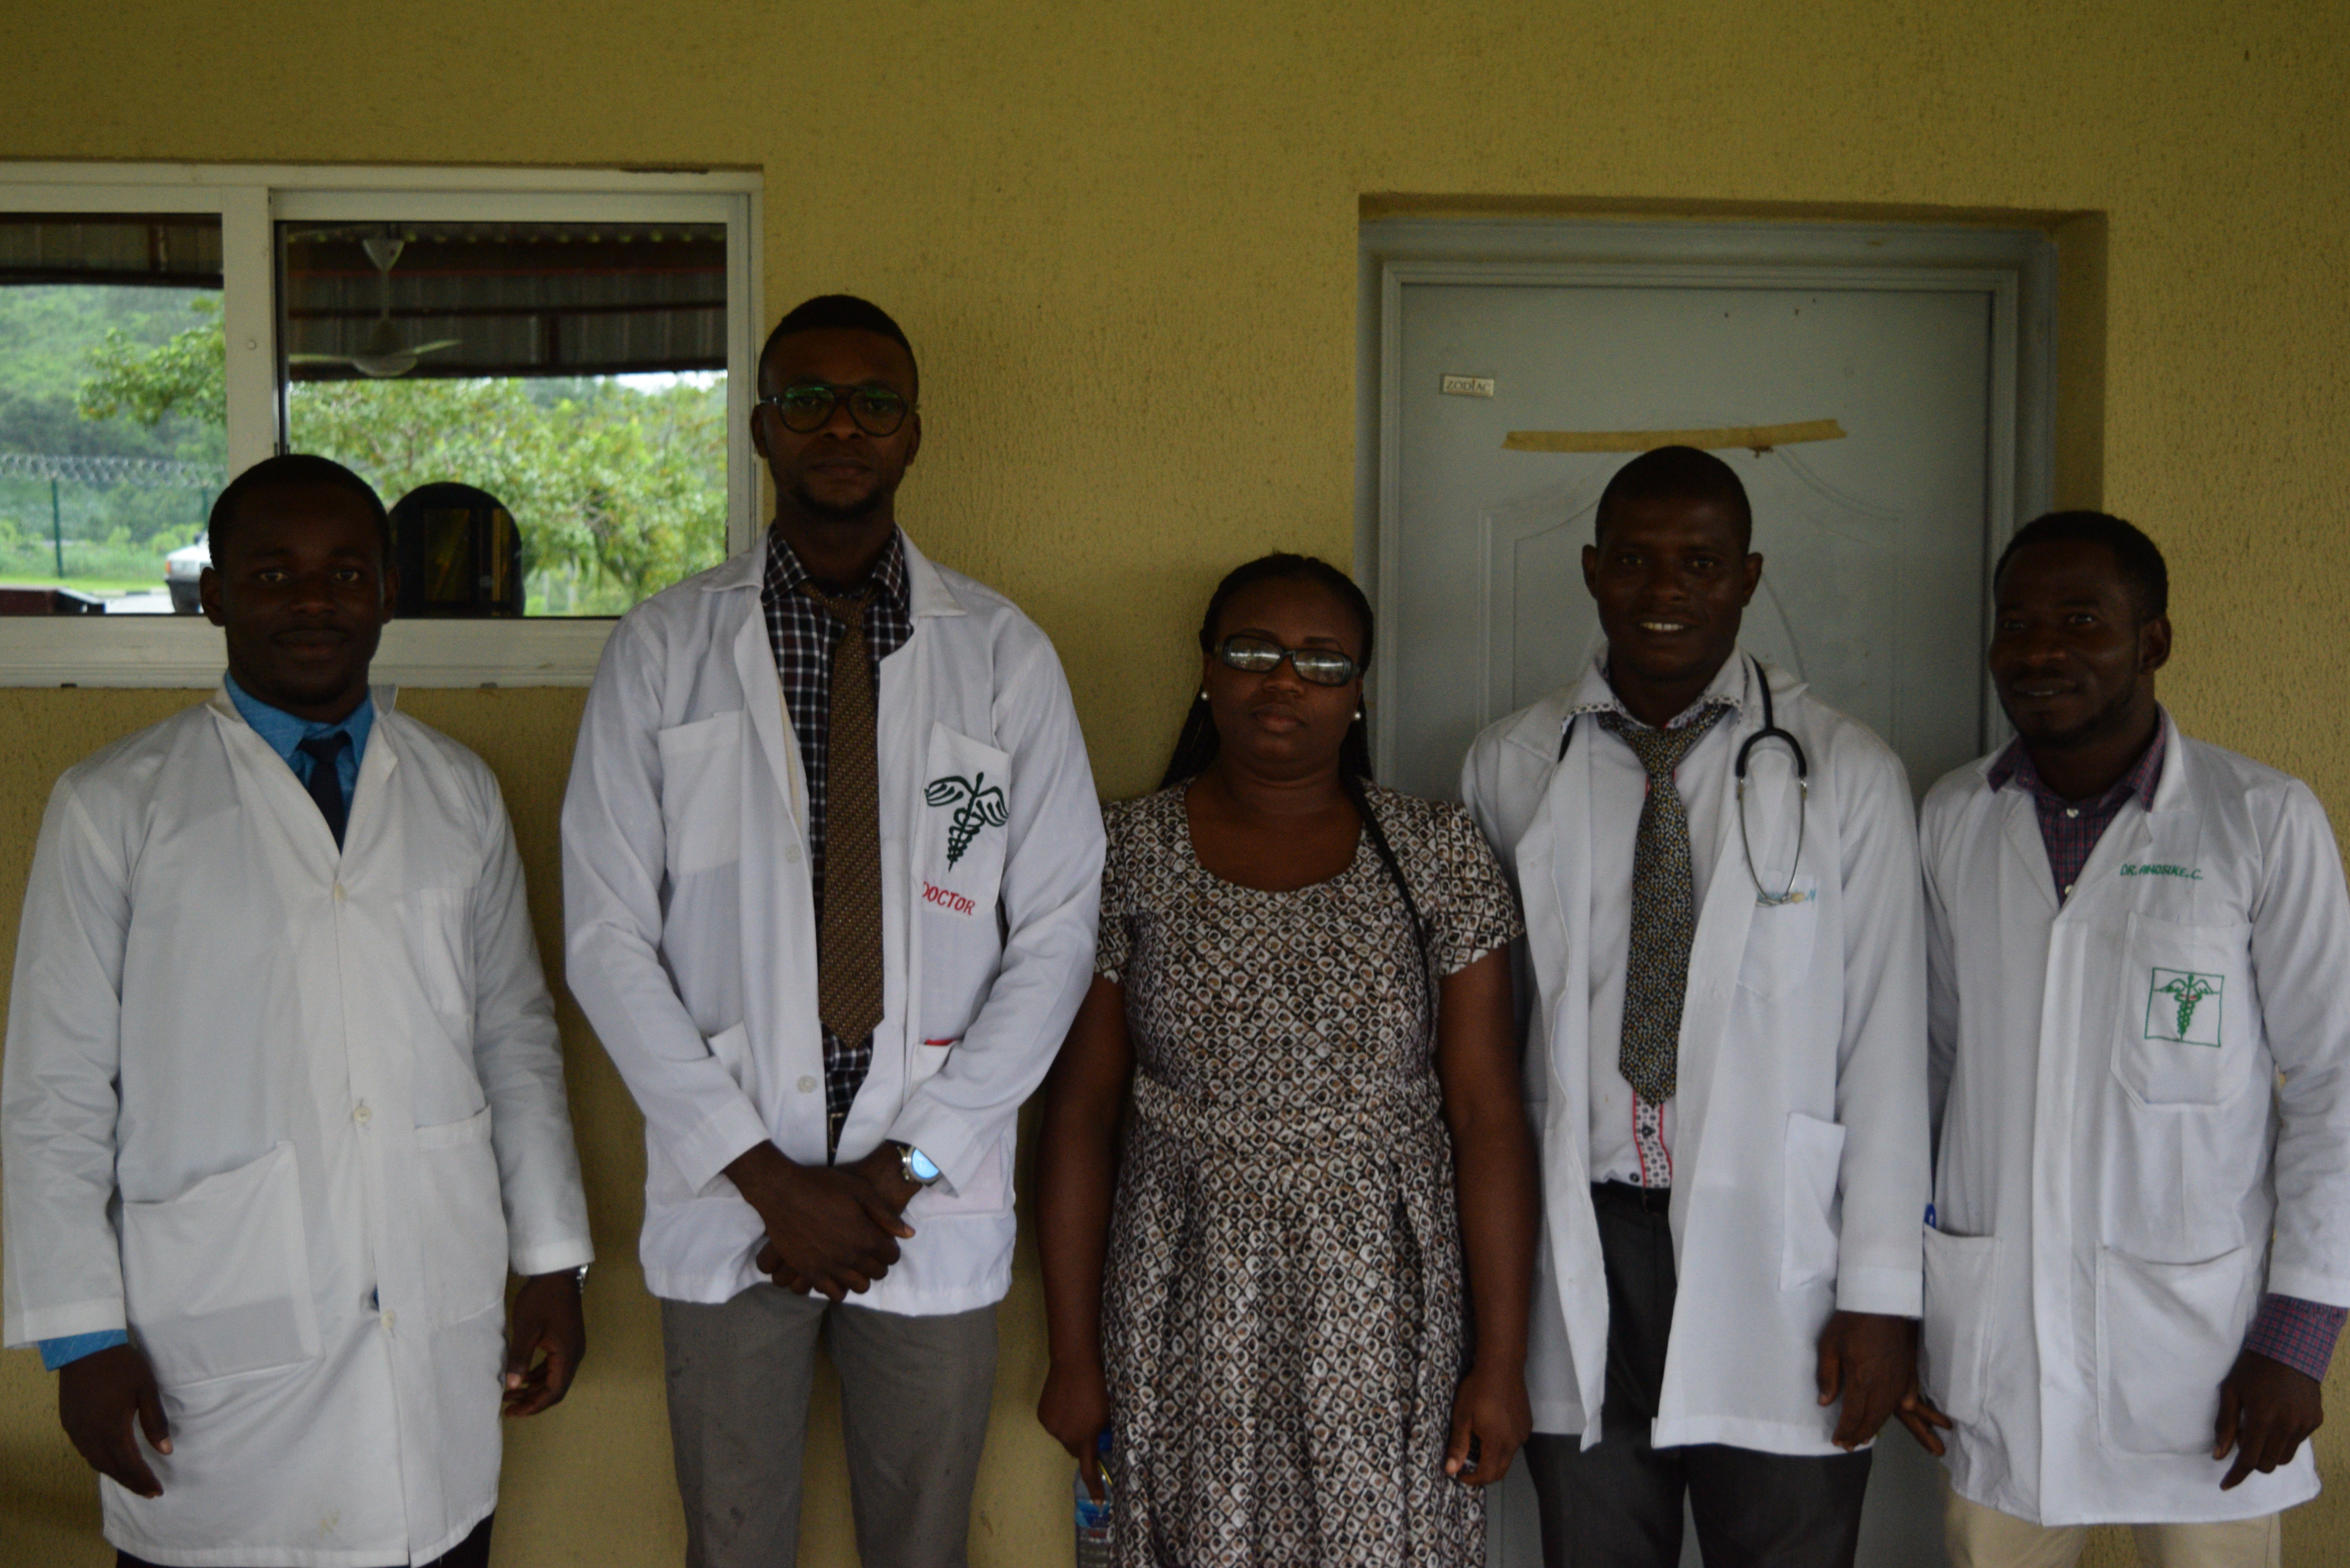 from left-Dr.Emeka Ijerema,Dr.Uche Okorie,Dr. Tochi.N,Dr. Leonard Okonkwo,Dr. Anosike Samuel from ABSUTH_that_conducted The free medical service